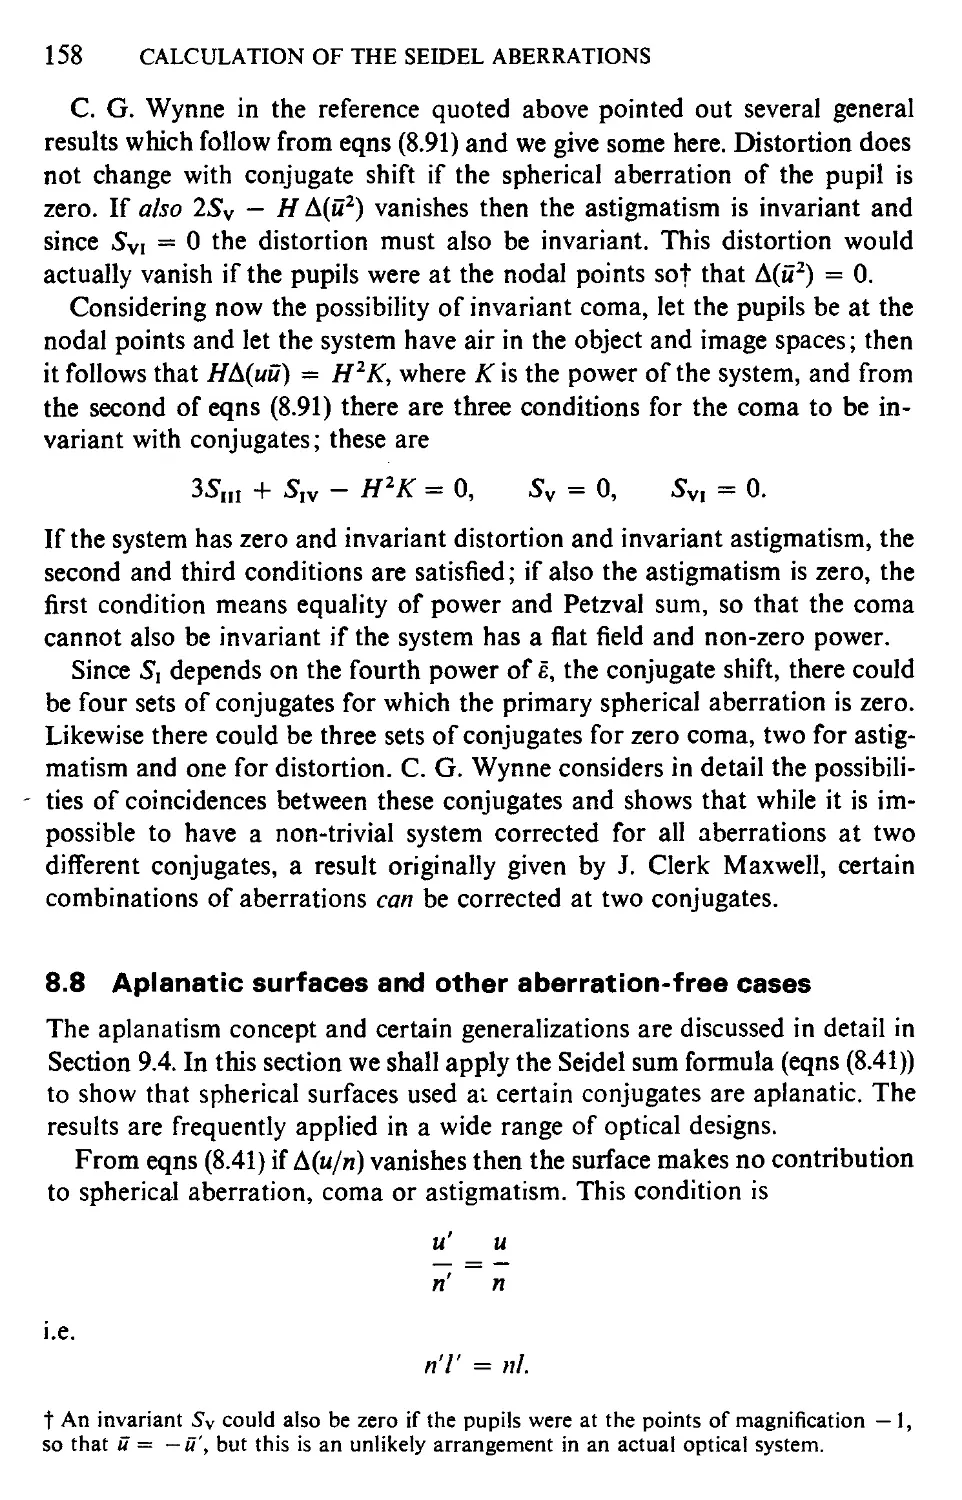 8.8 Aplanatic surfaces and other aberration-free cases